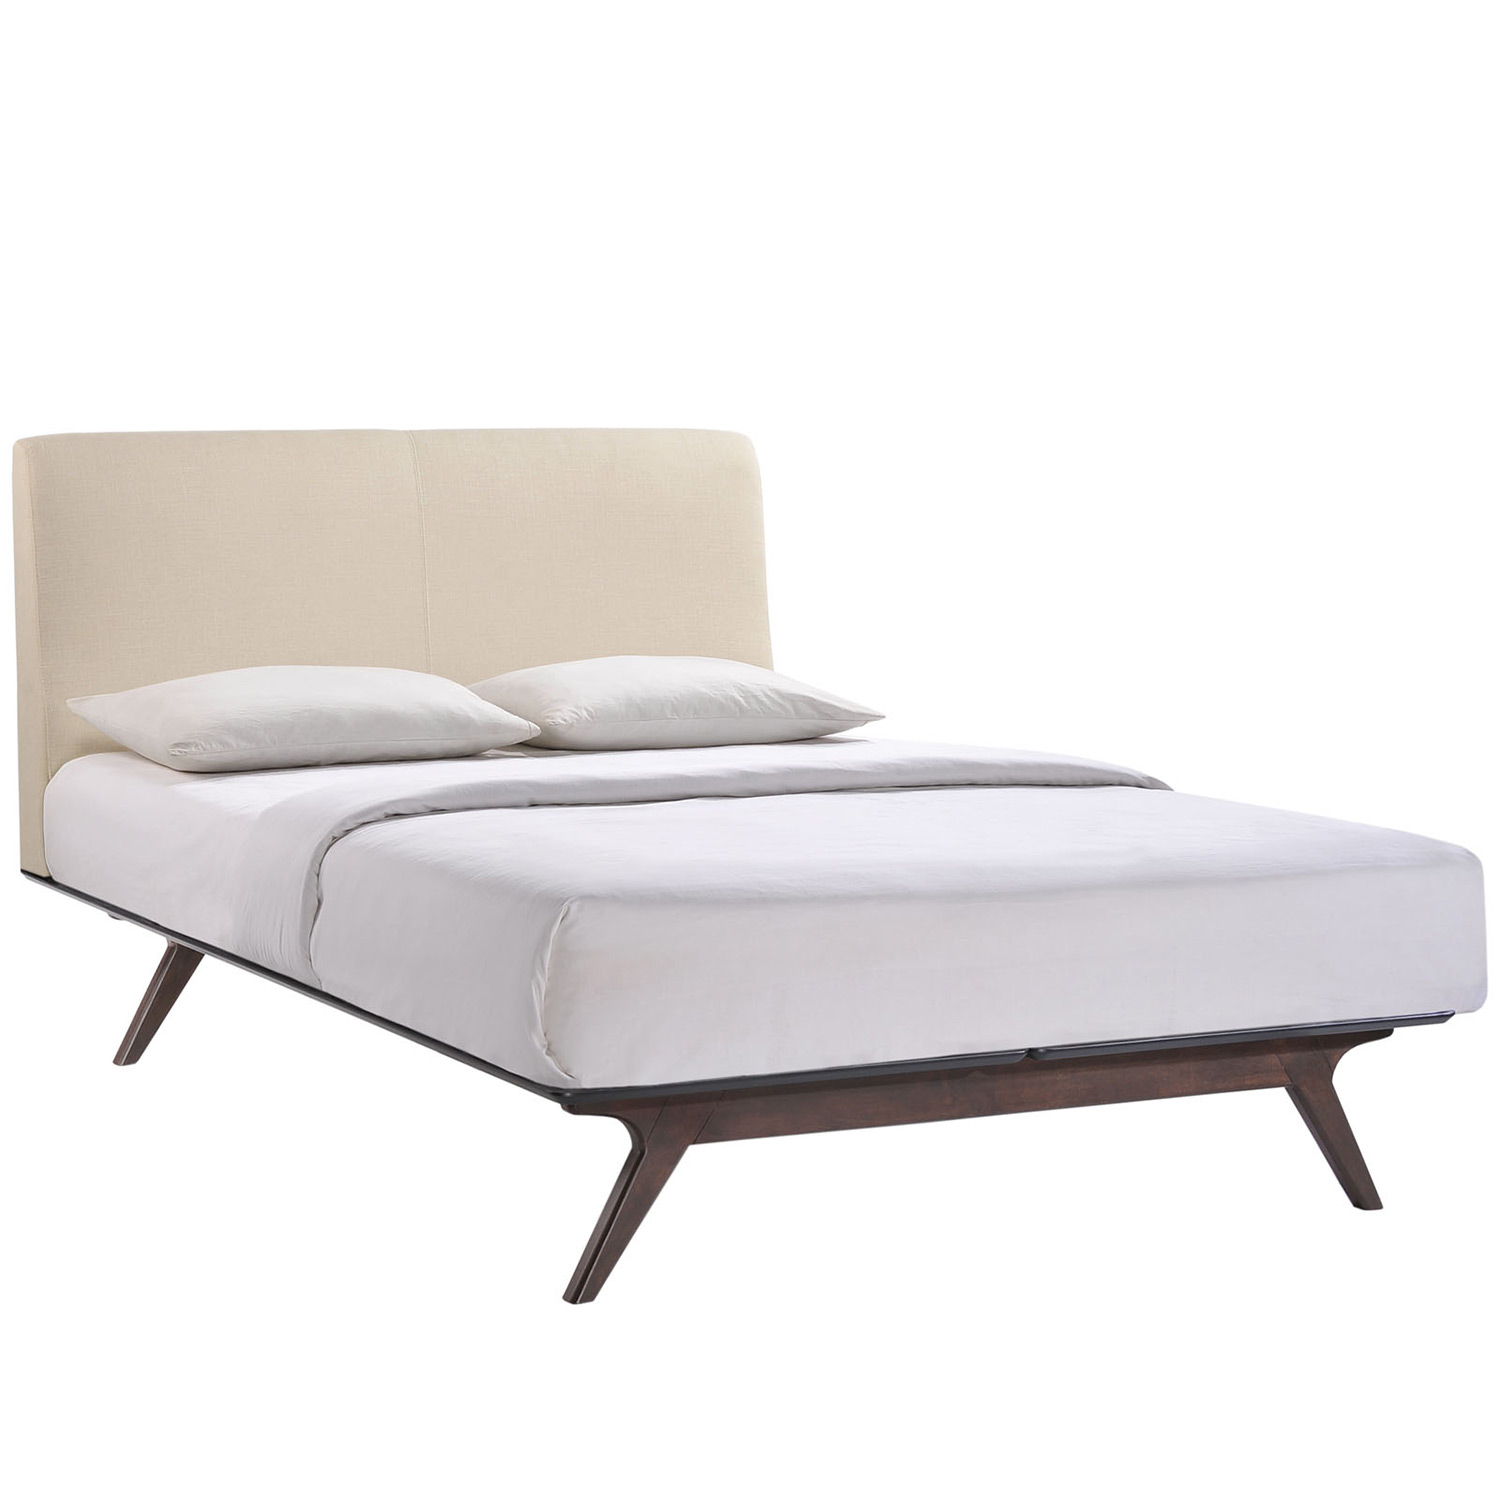 Modway Tracy Bed - Cappuccino Beige